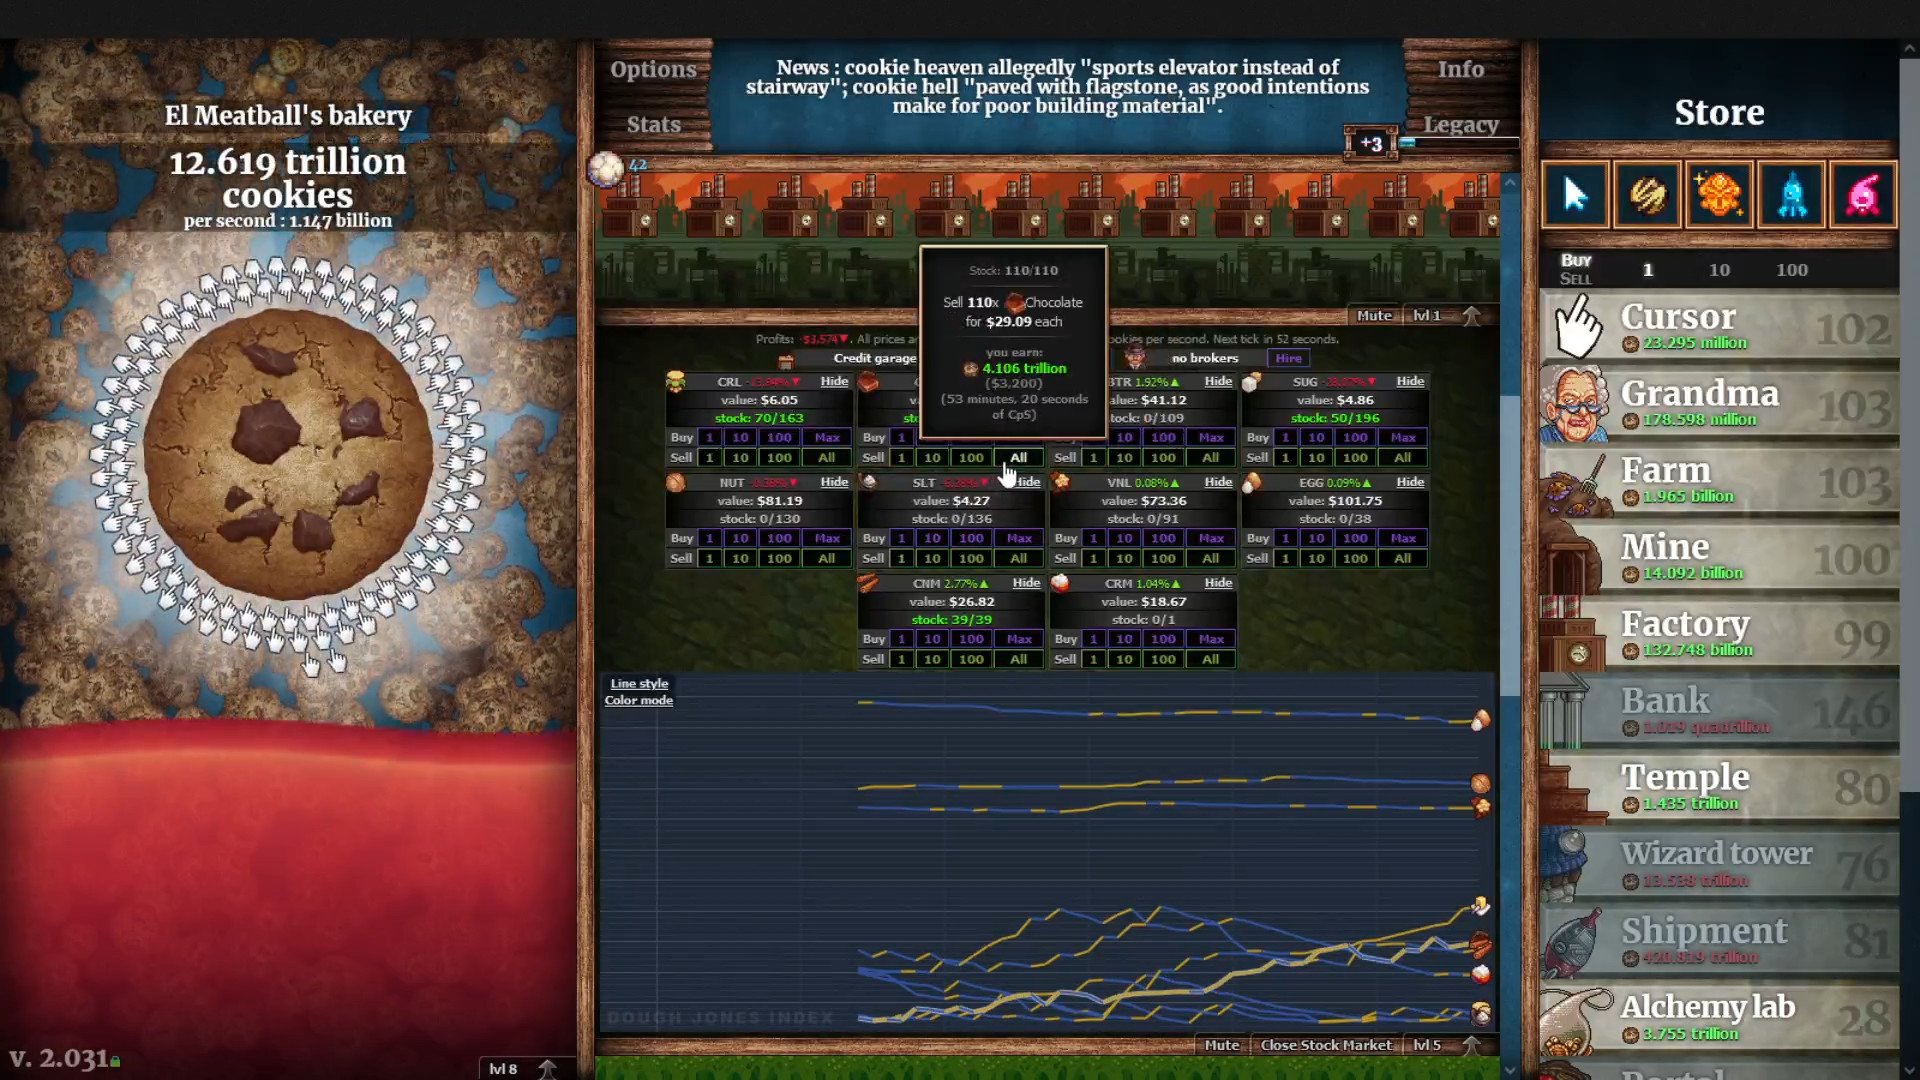 Video Game Review: “Cookie Clicker”